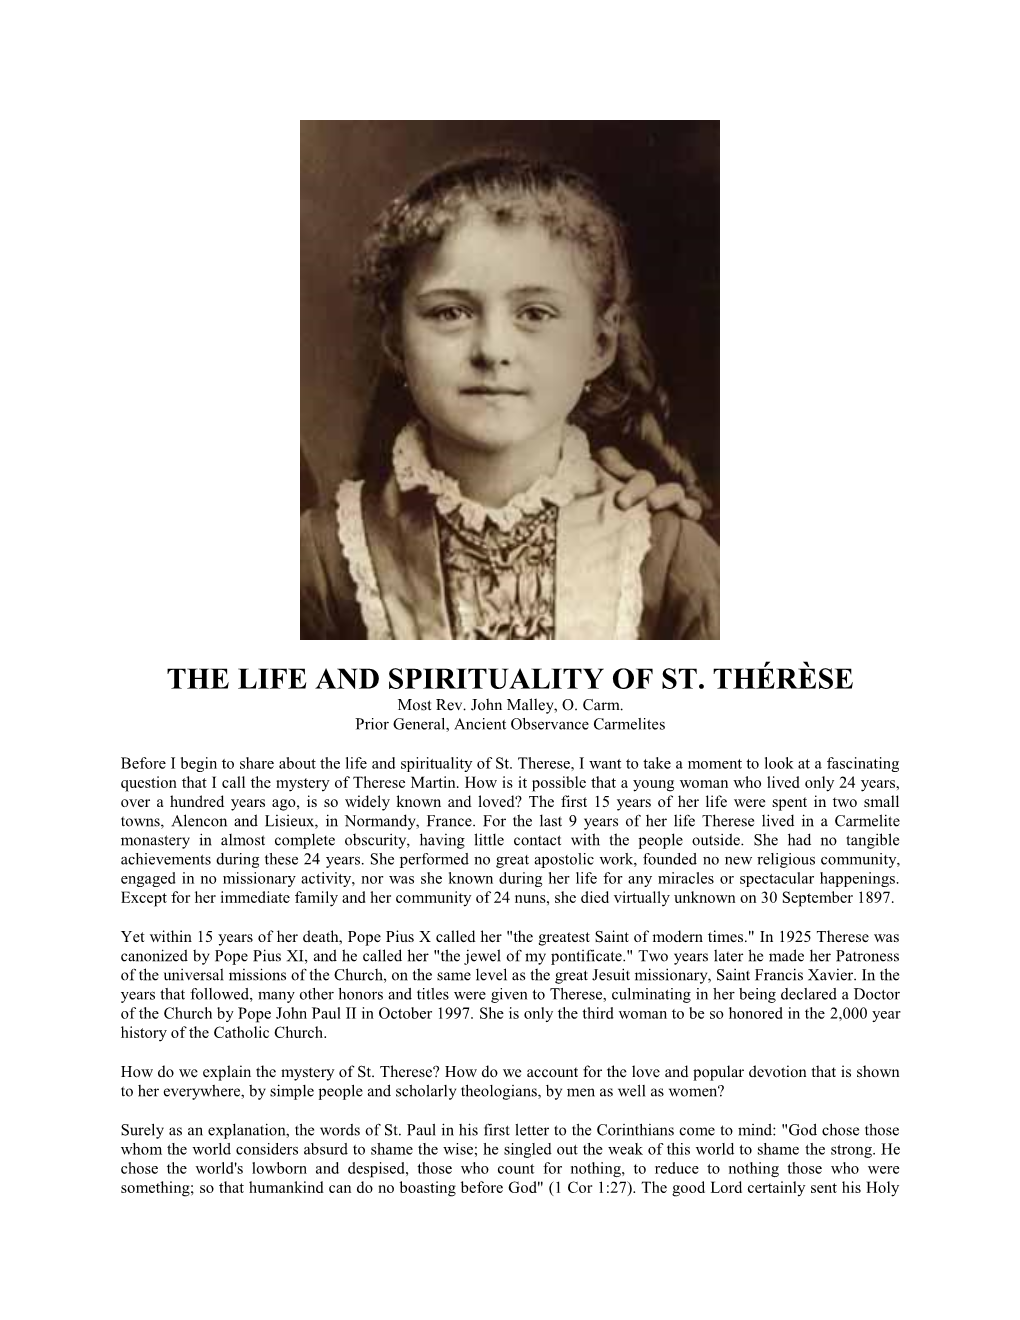 The Life and Spirituality of St. Therese, I Want to Take a Moment to Look at a Fascinating Question That I Call the Mystery of Therese Martin